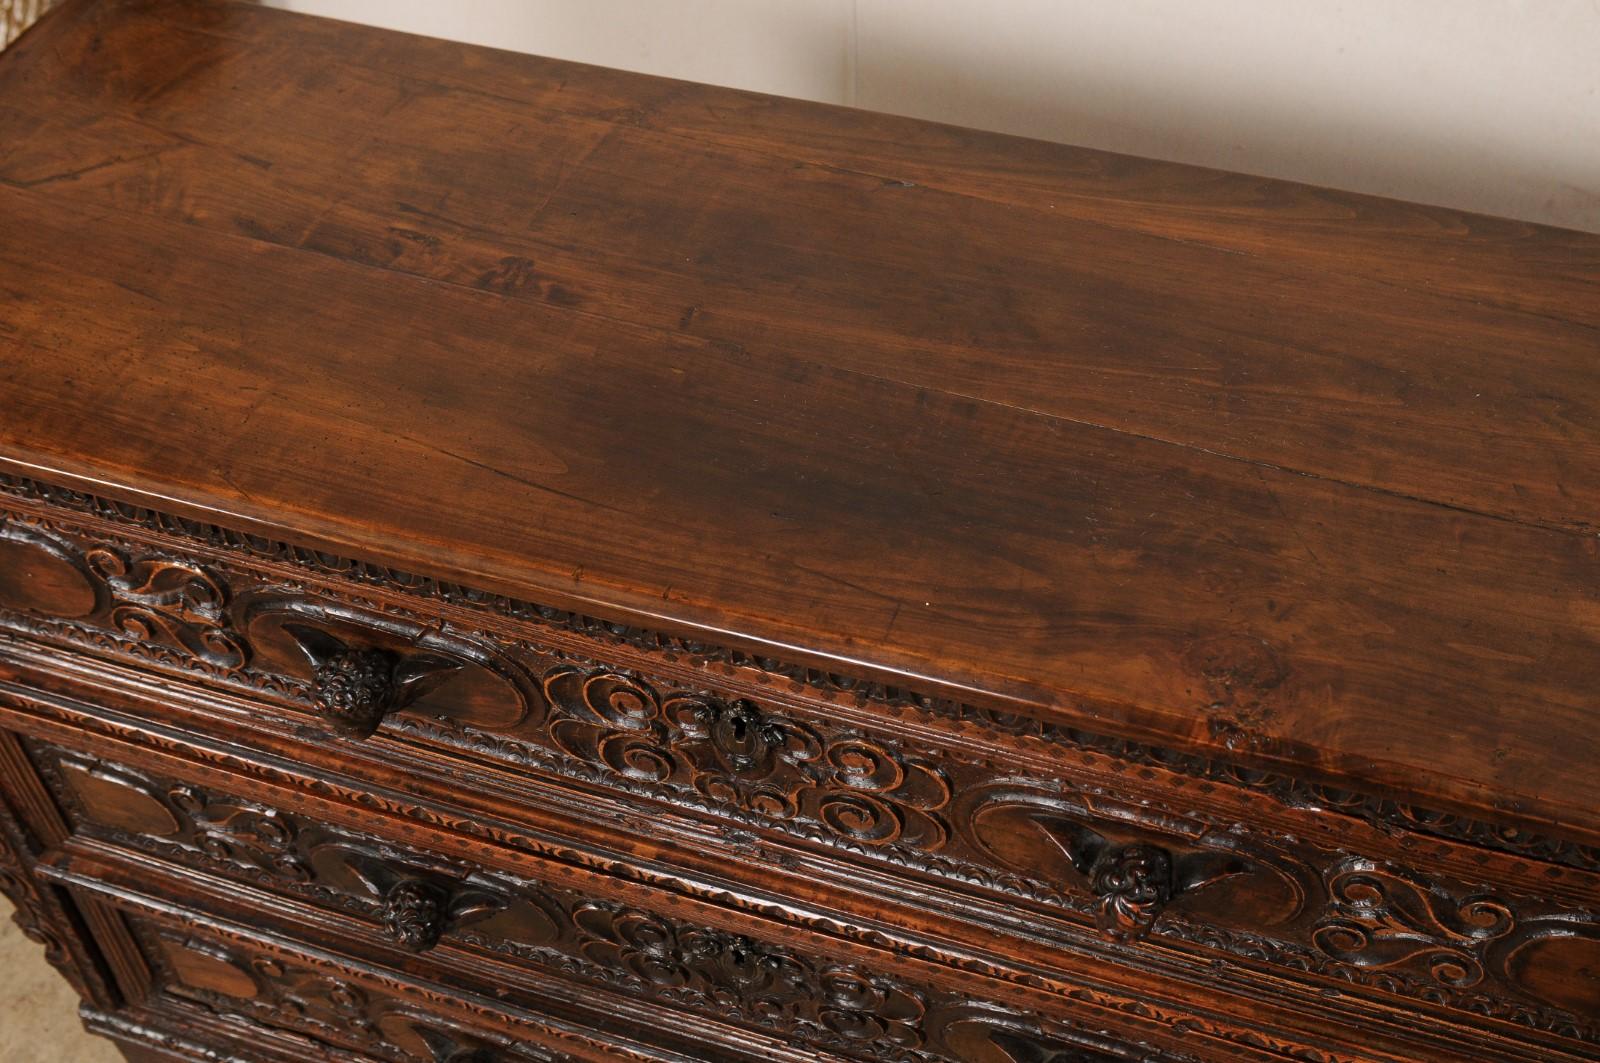 Early 18th C Italian Elaborately-Embellished Commode w/Putti Carved Drawer Pulls For Sale 1